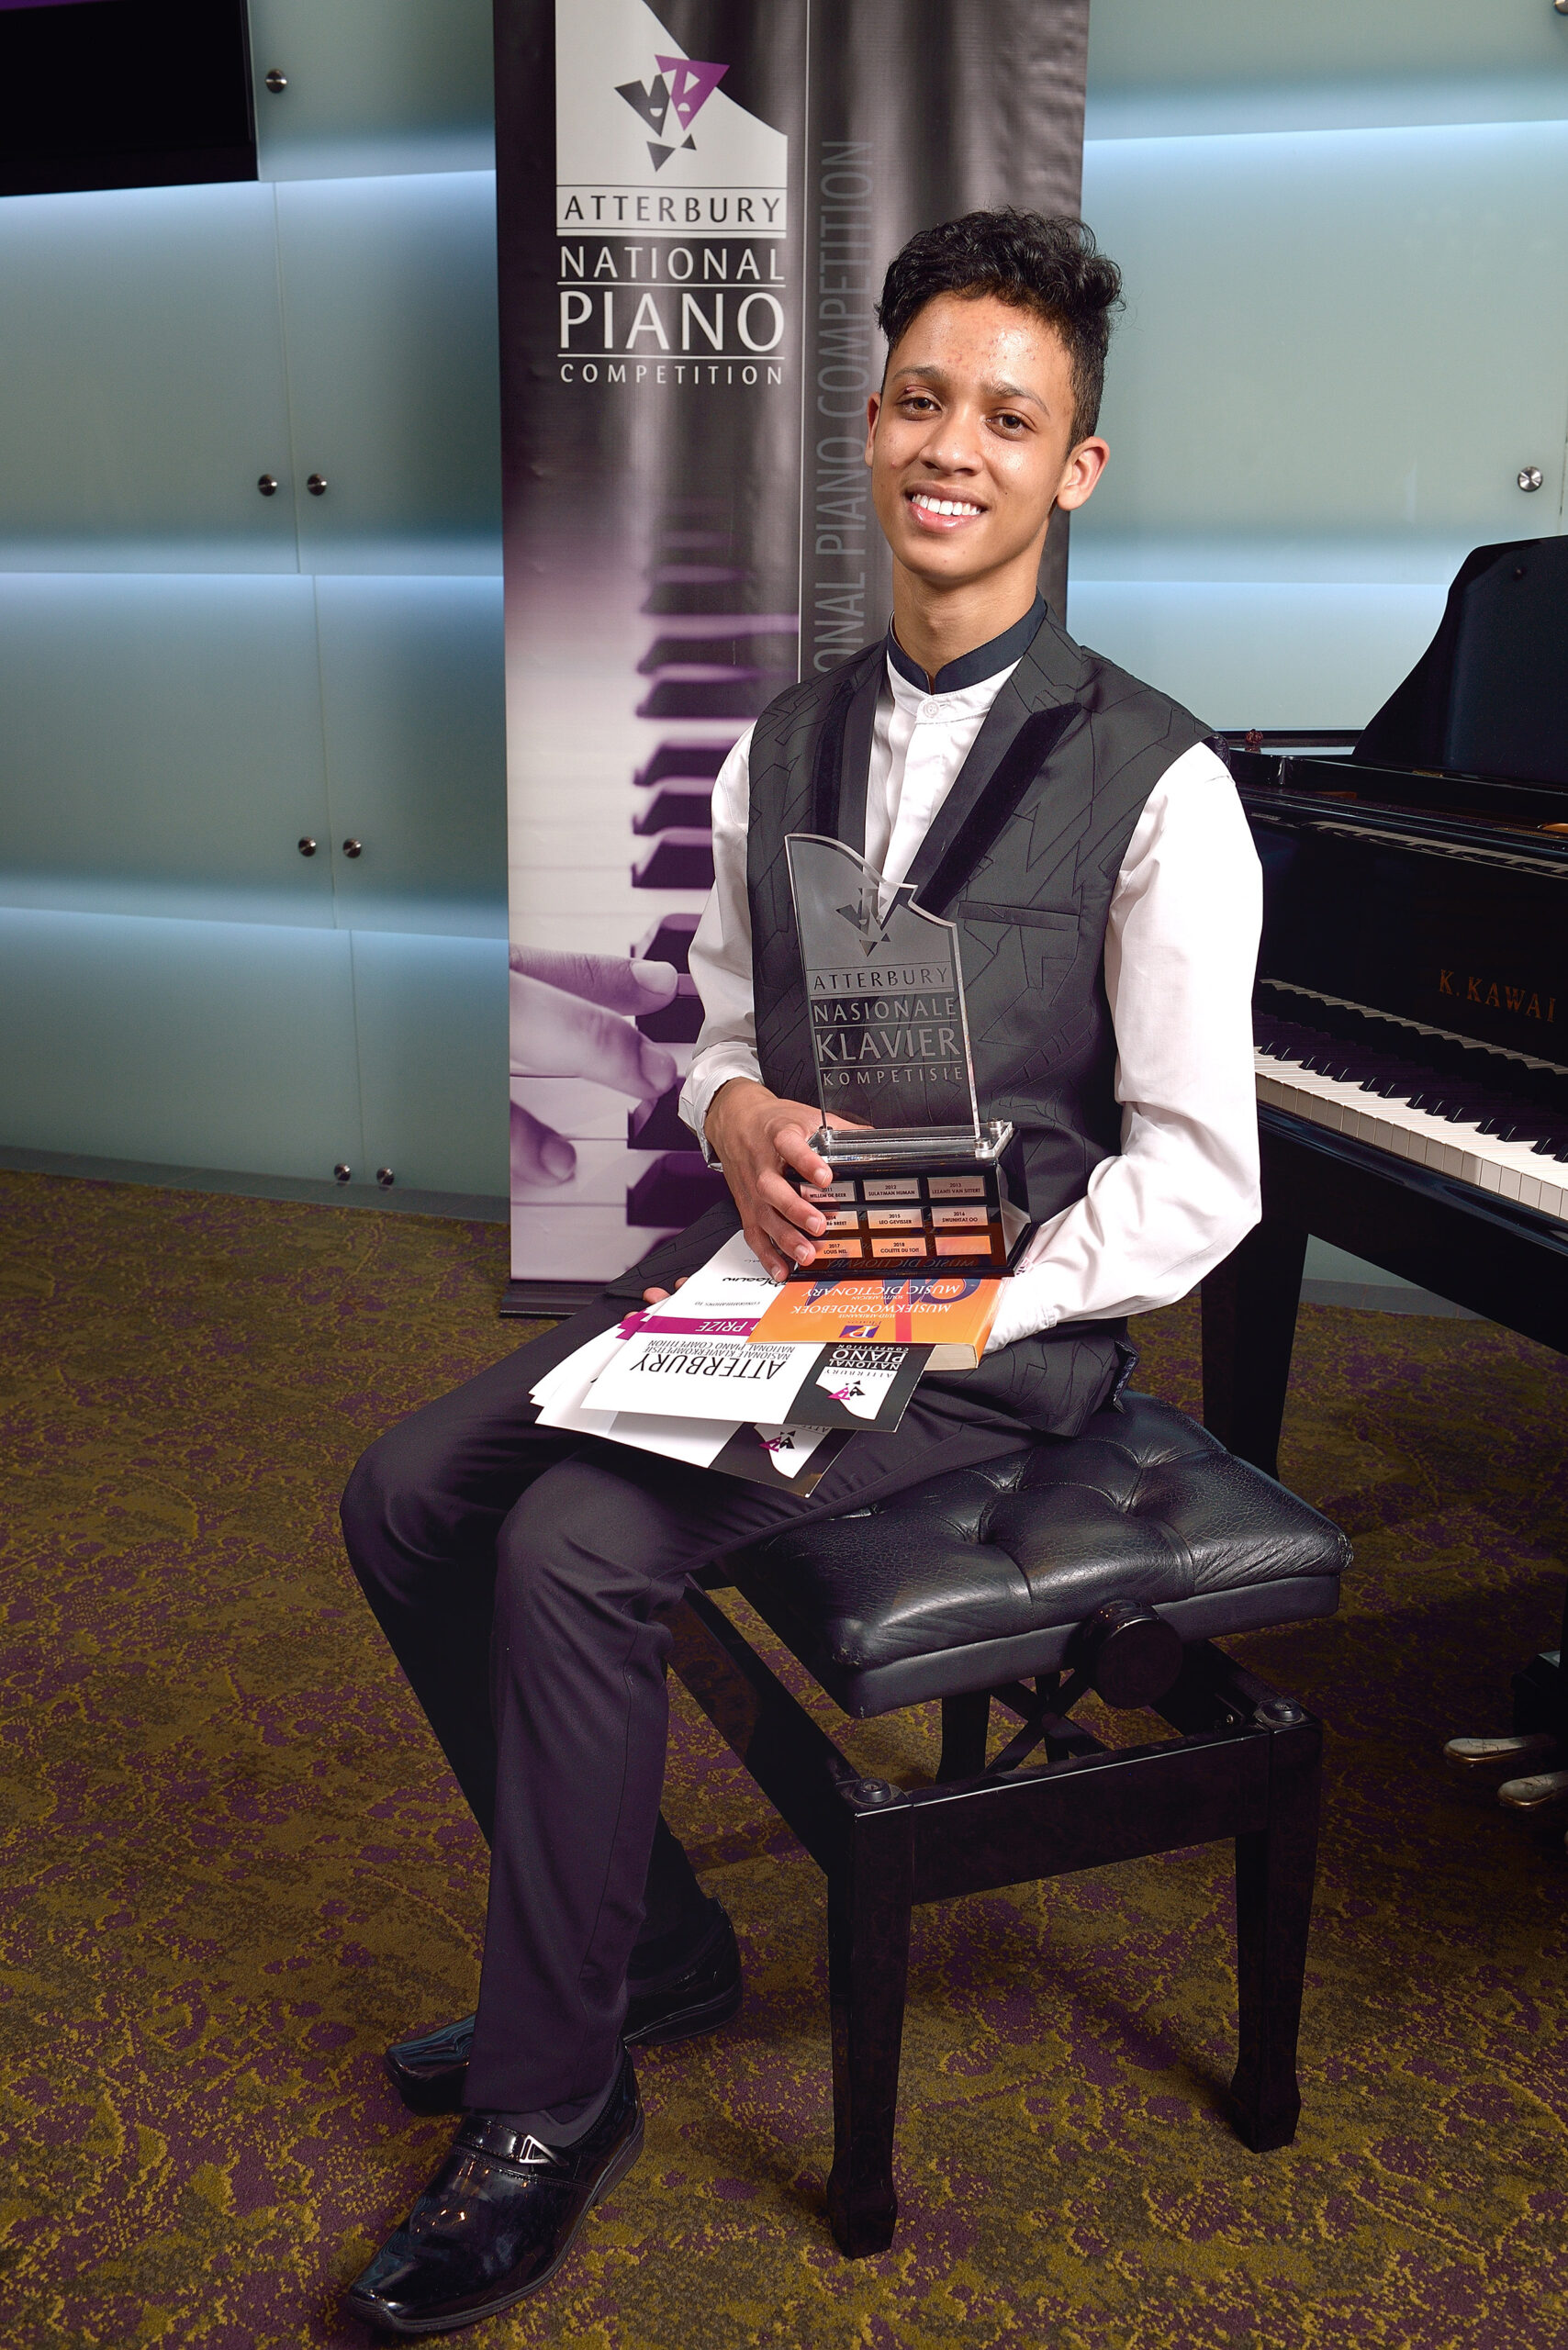 Atterbury National Piano Competition 2021